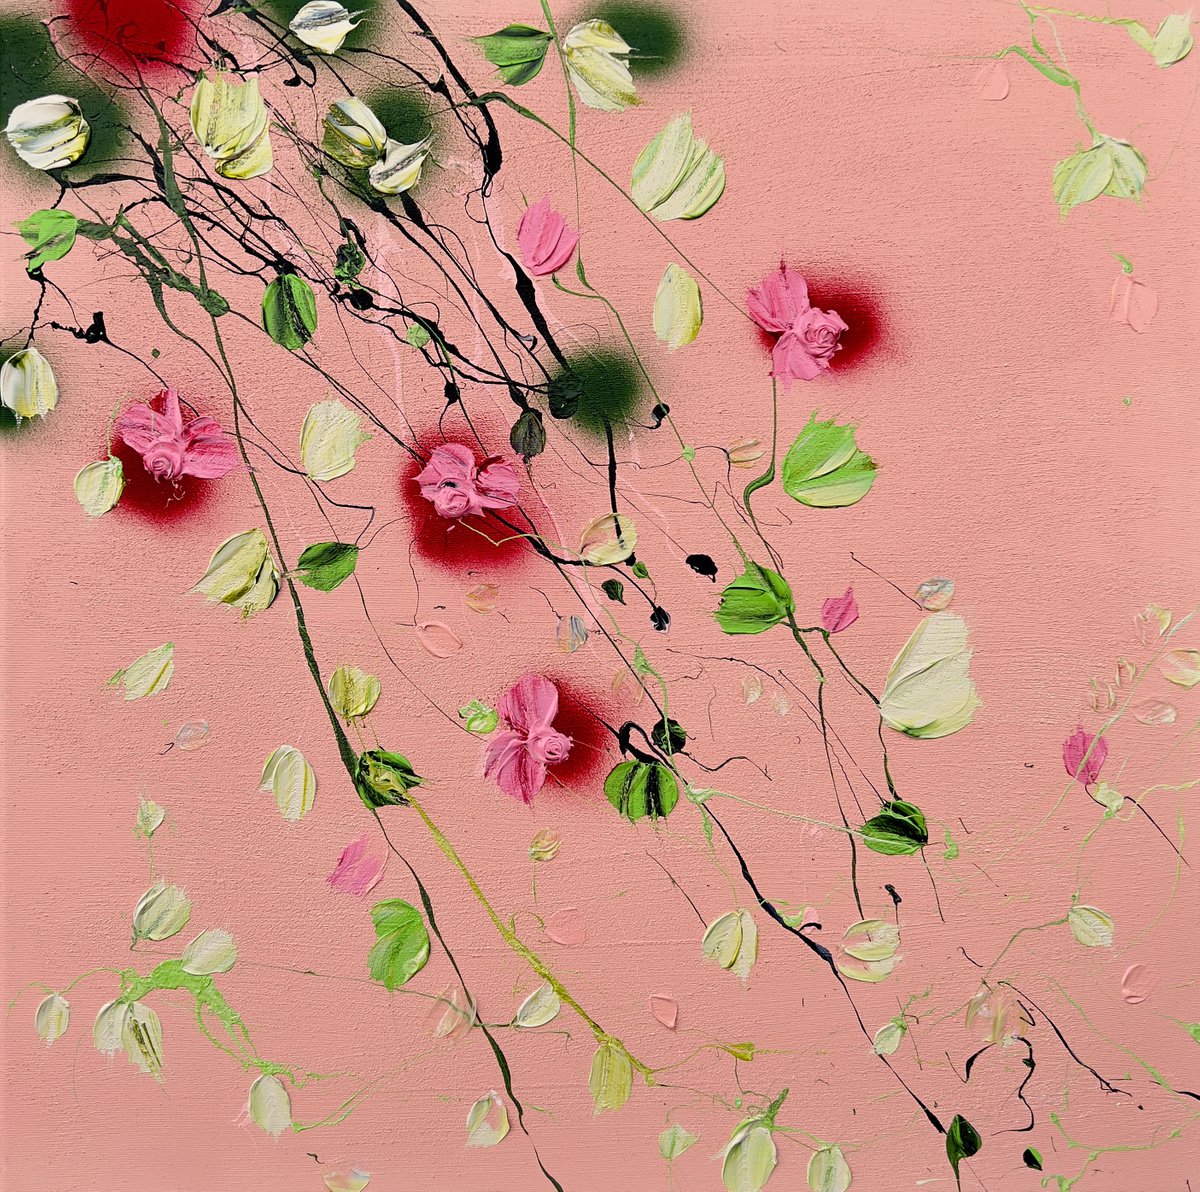 Square acrylic structure painting with flowers Rose Day II-? by Anastassia Skopp